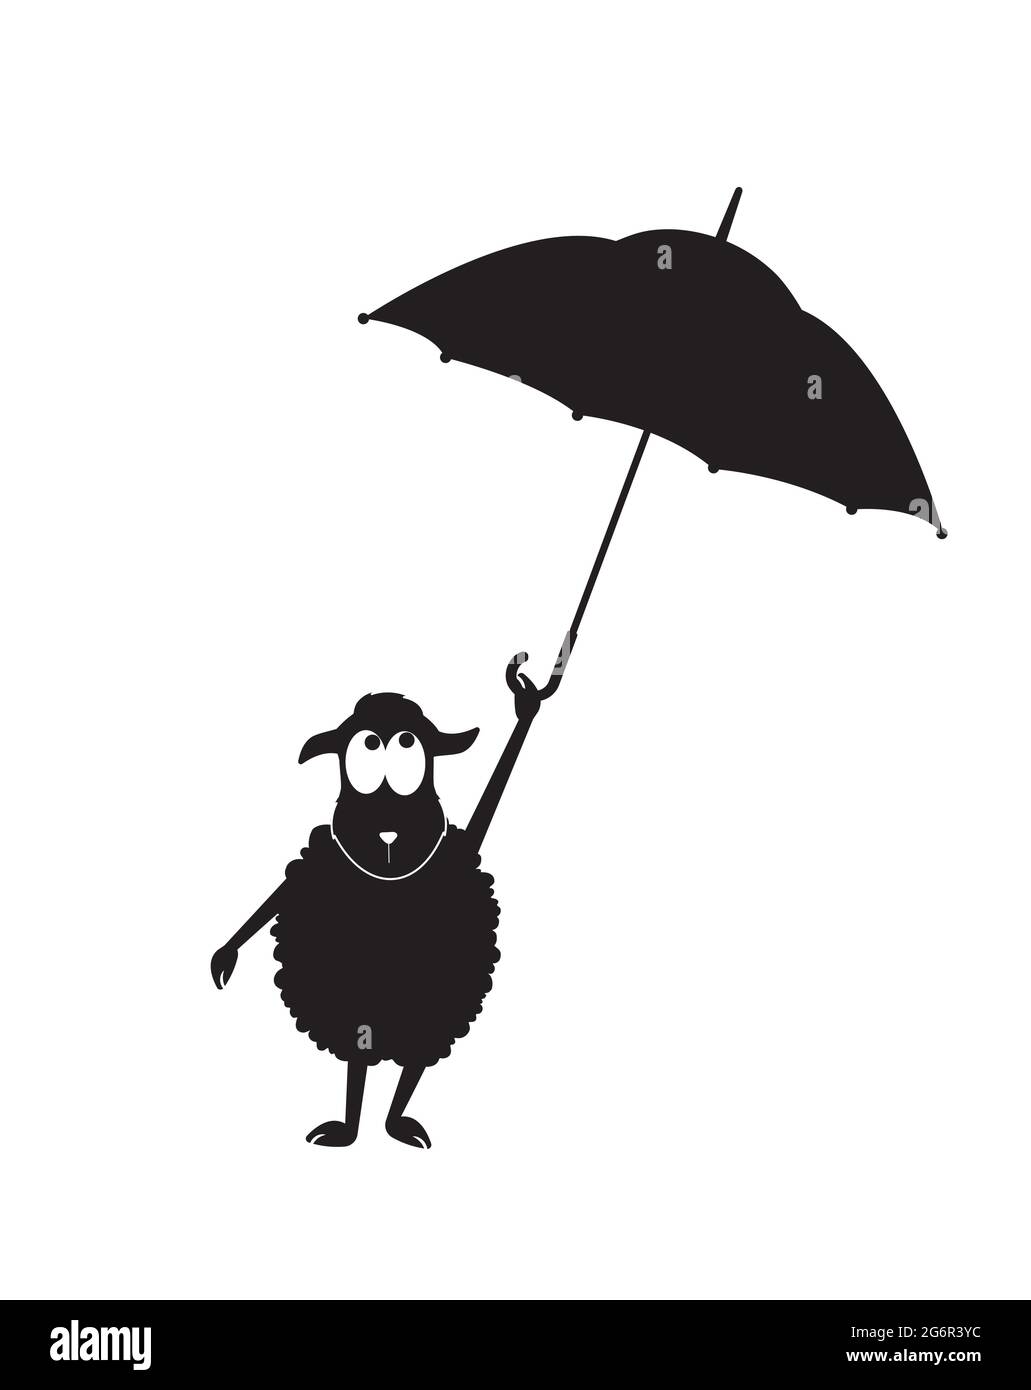 Illustration Silhouette Girl Holding Umbrella High Resolution Stock Photography And Images Alamy